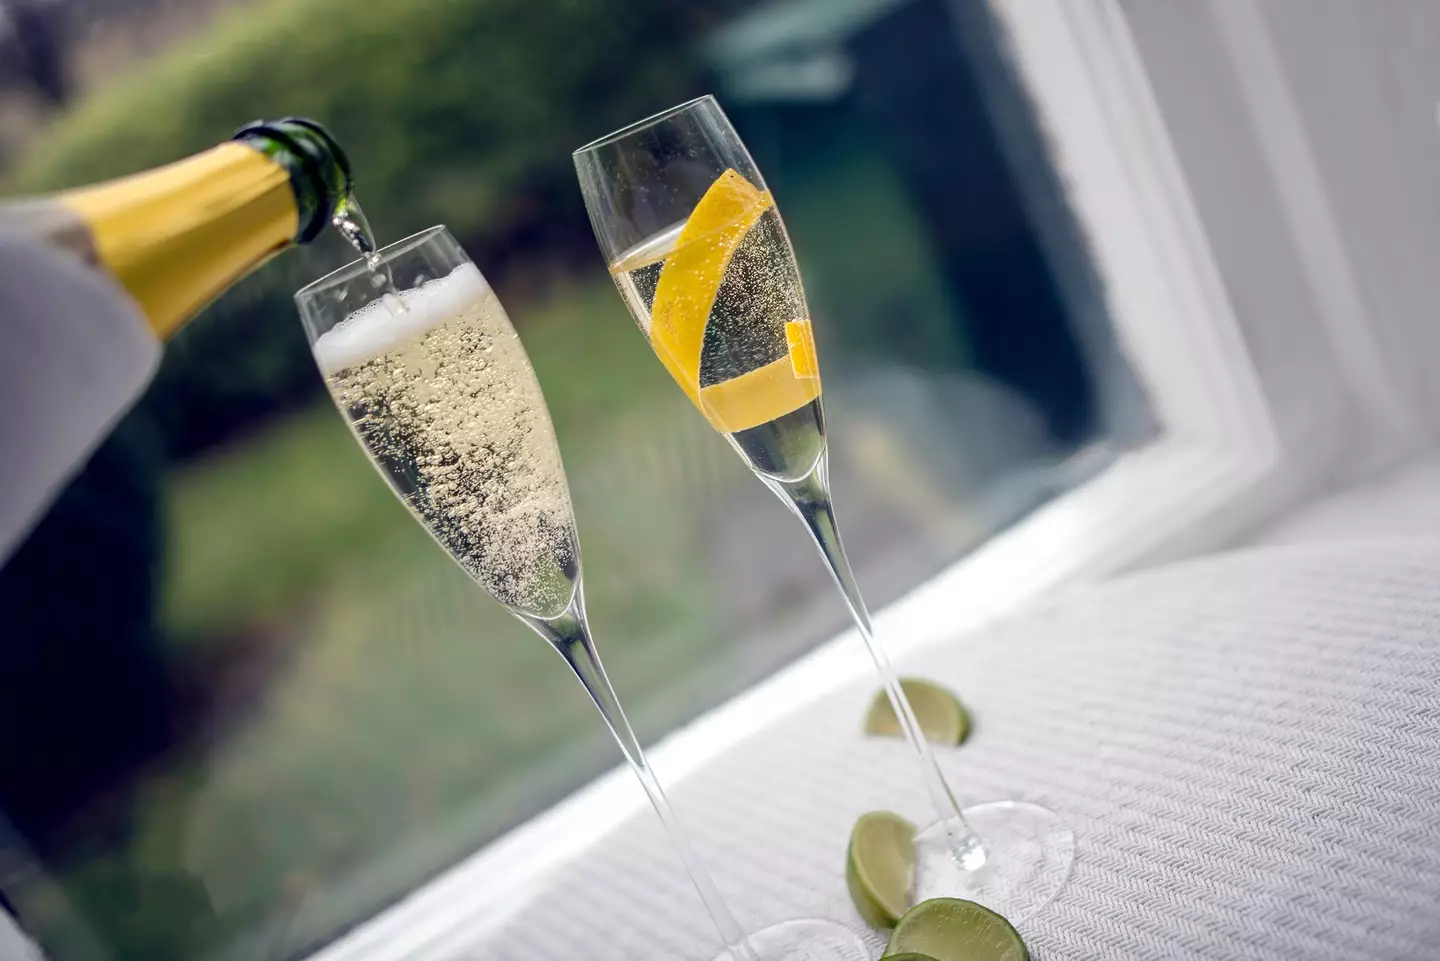 Prosecco could soon become a thing of the past.